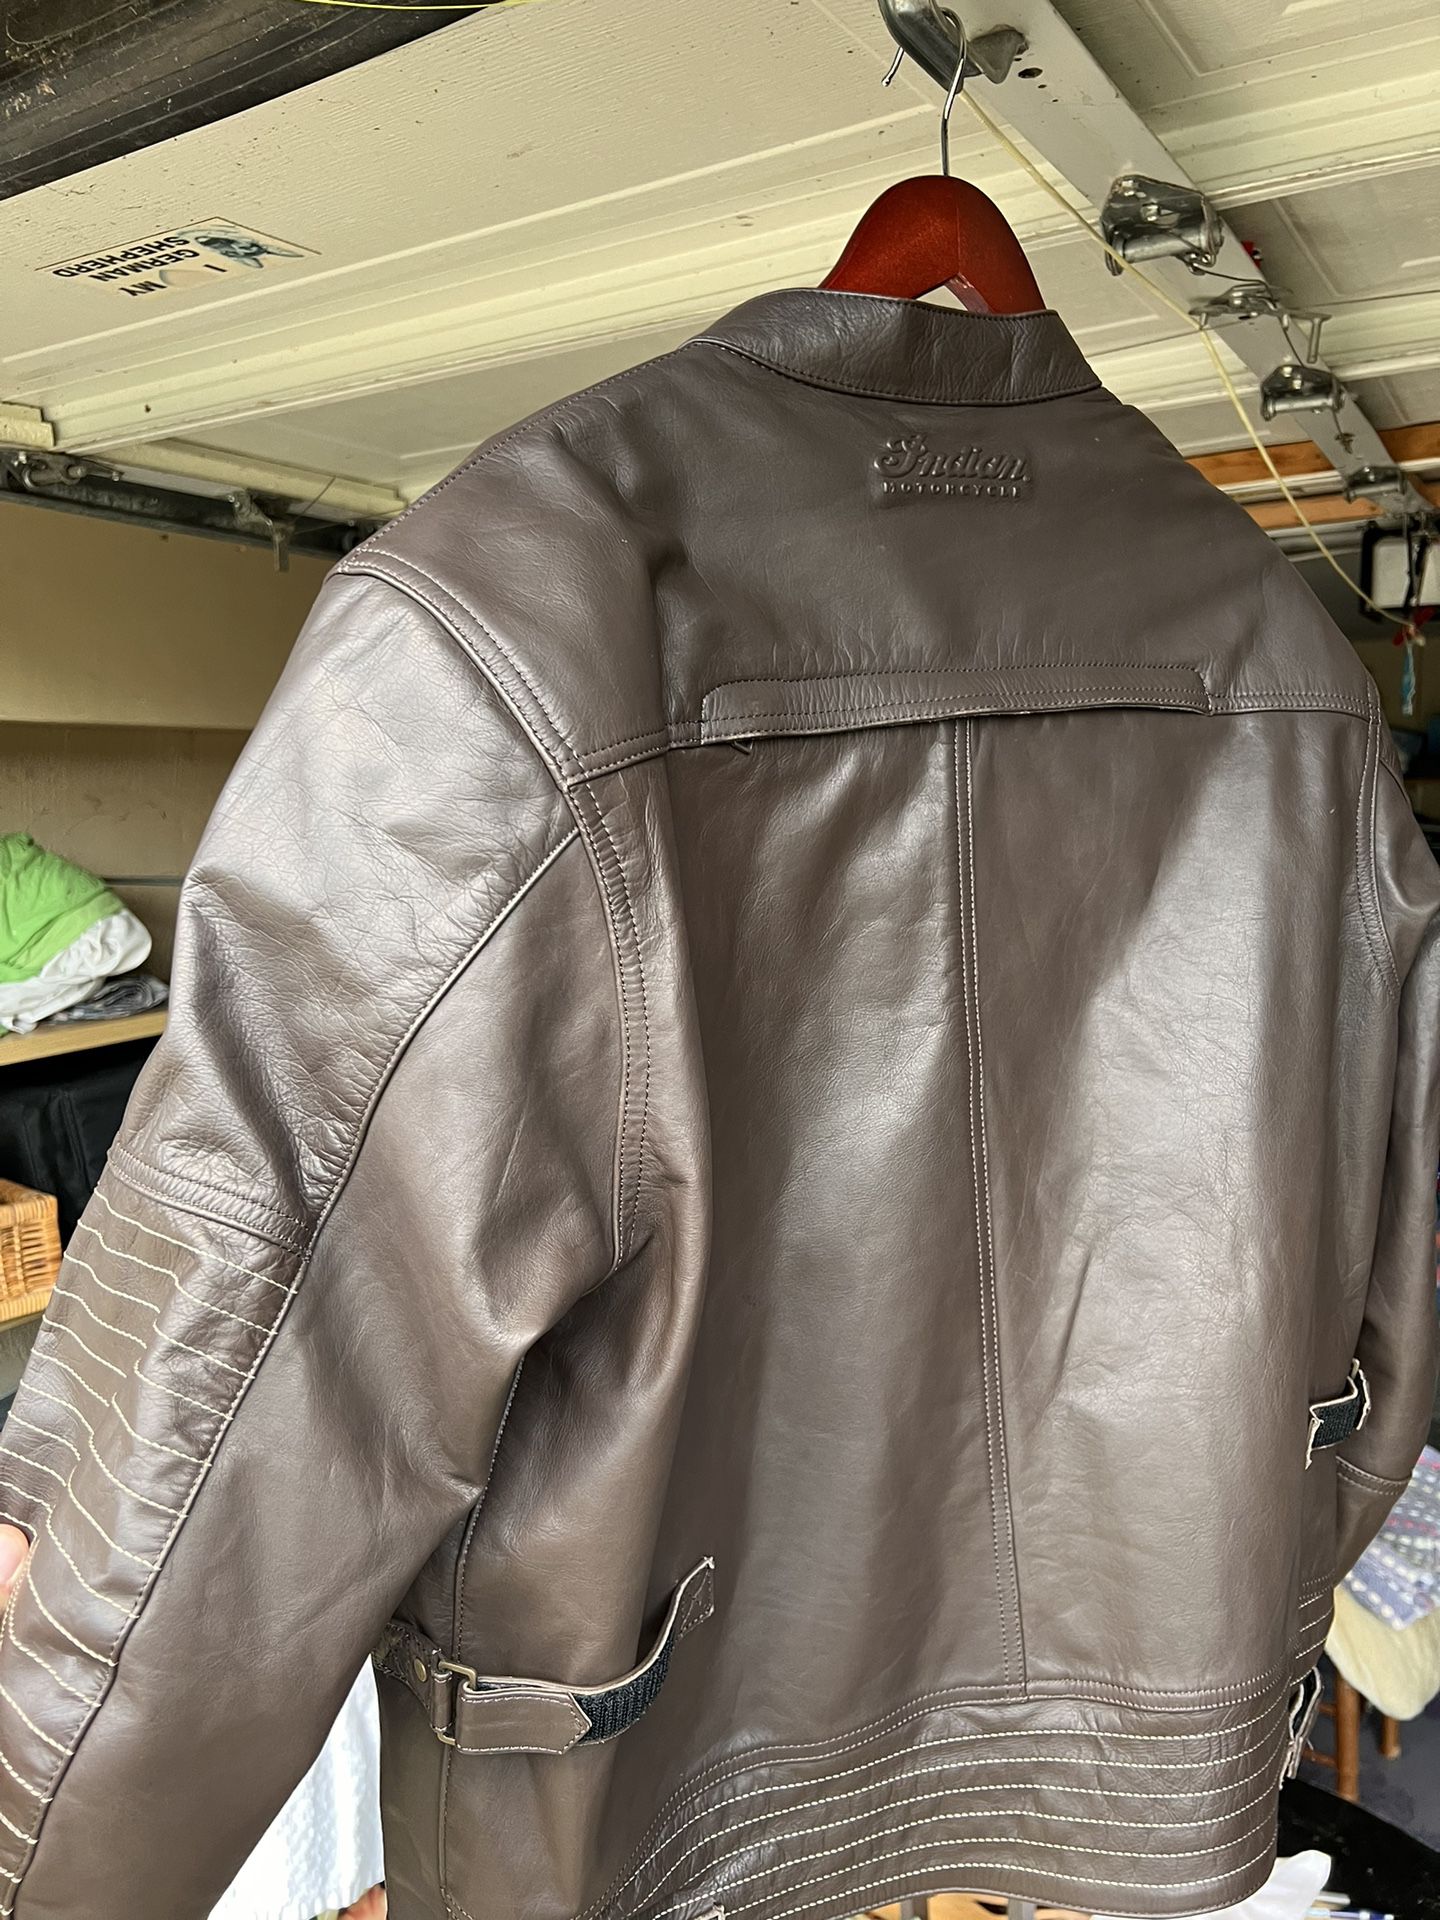 Indian Motorcycle Jackets